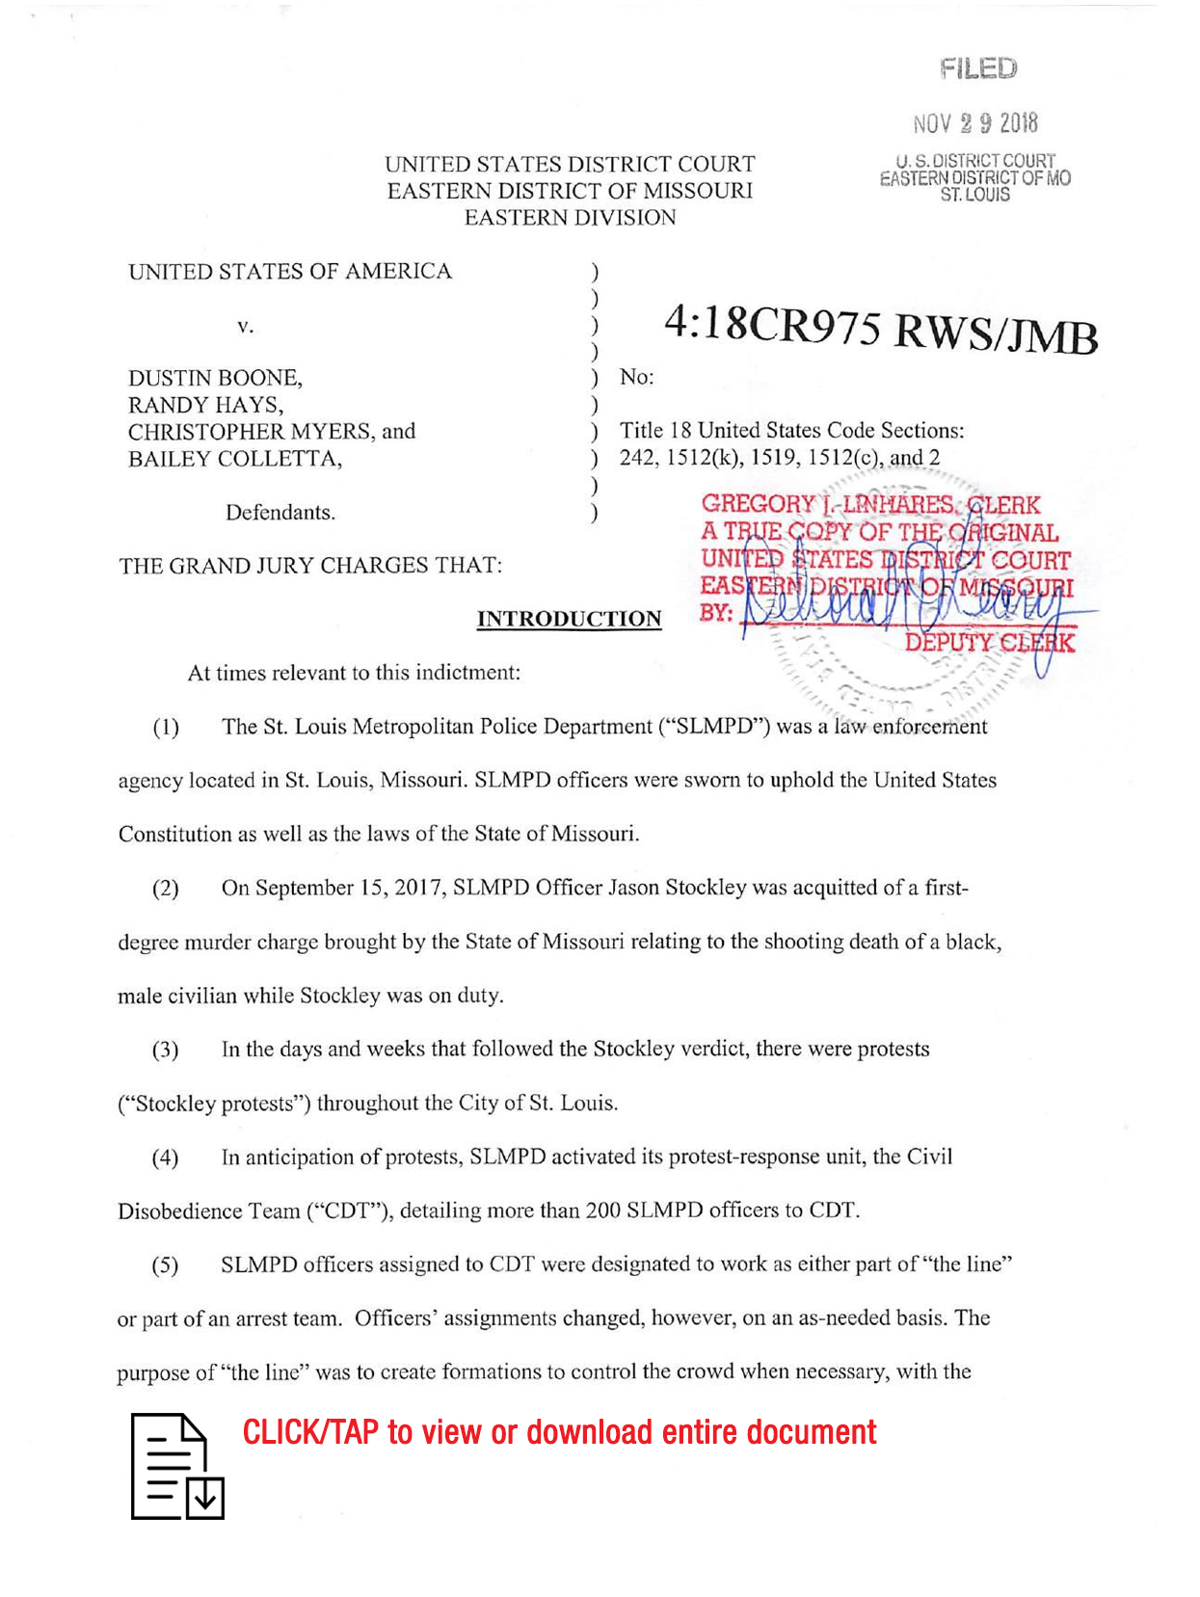 Read the indictment against the St. Louis police officers (NOTE: LANGUAGE WARNING)